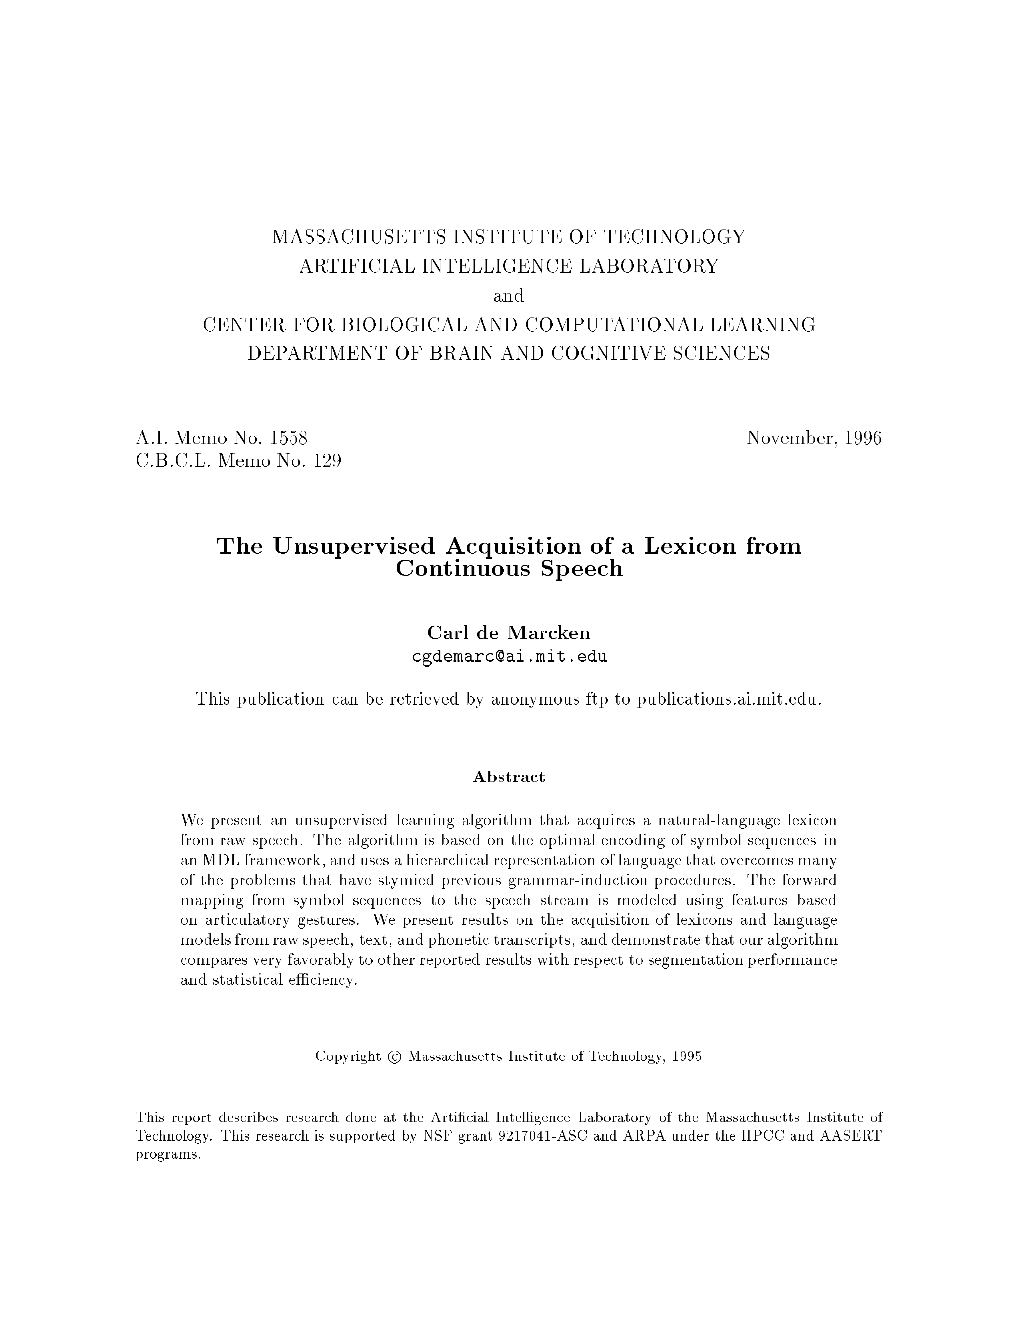 The Unsupervised Acquisition of a Lexicon from Continuous Speech